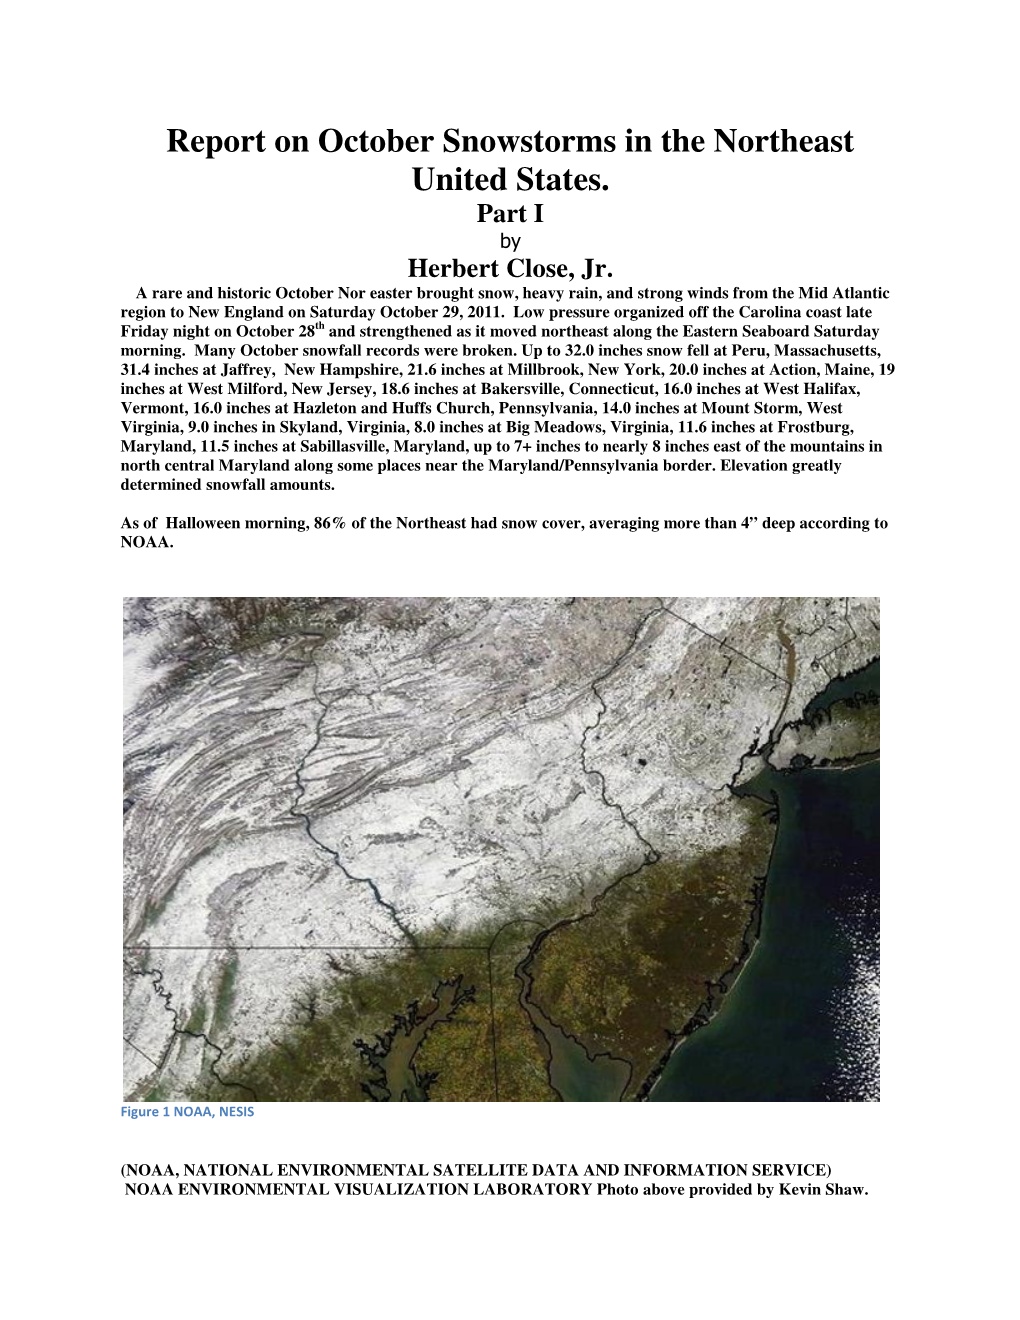 Report on October Snowstorms in the Northeast United States. Part I by Herbert Close, Jr